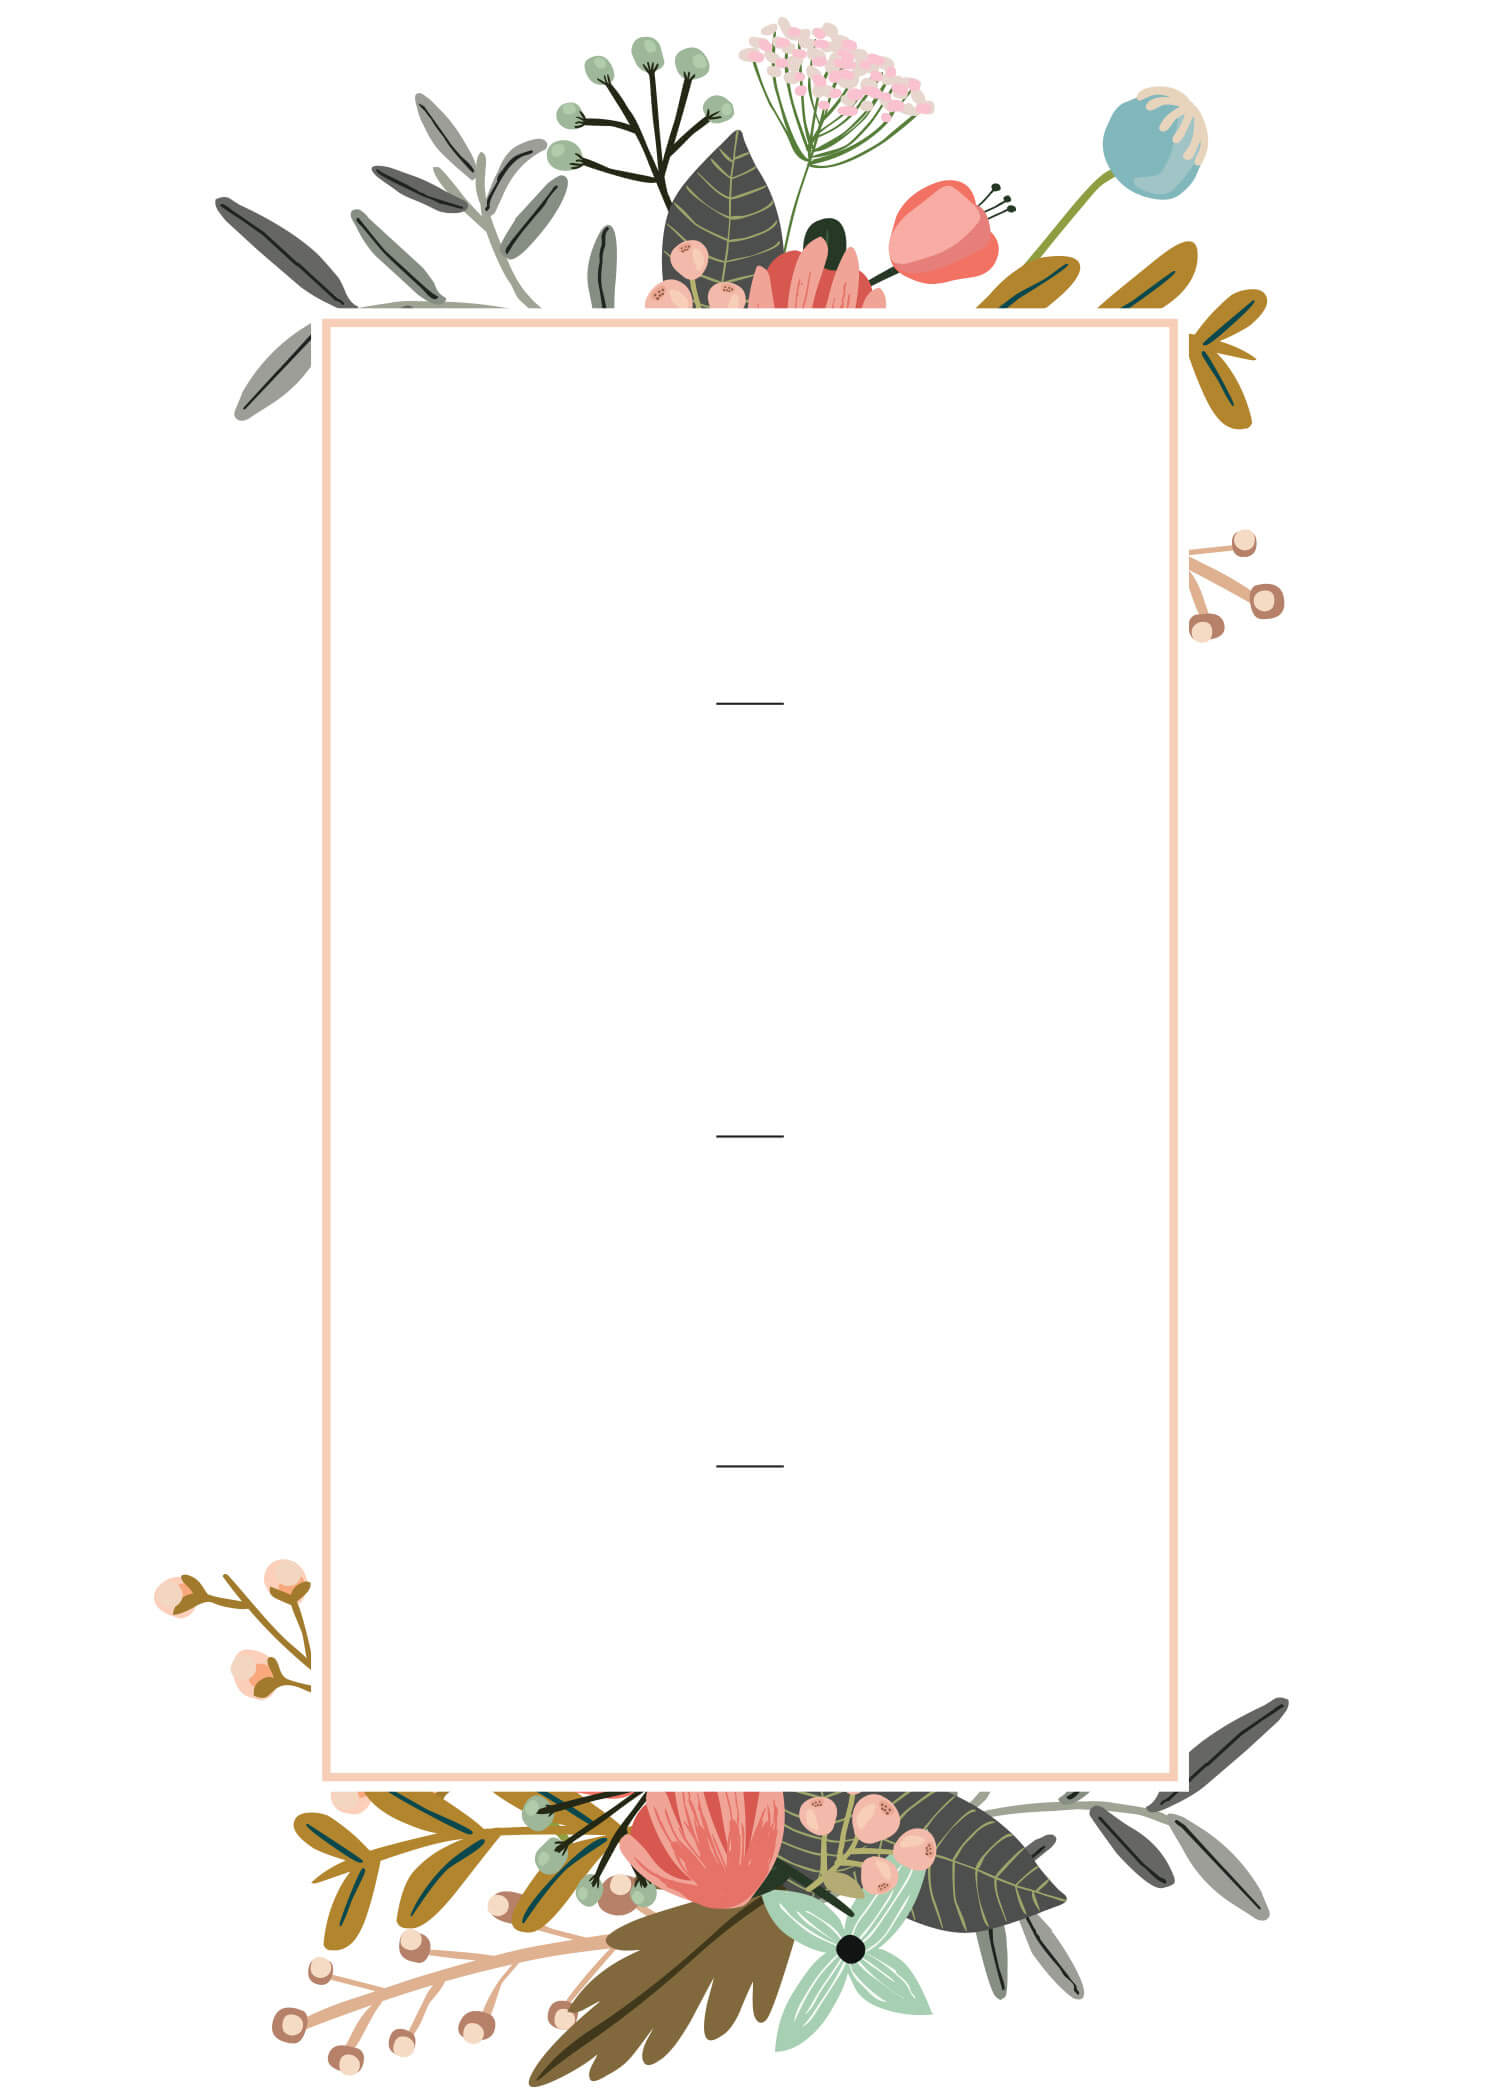 Editable Wedding Invitation Templates For The Perfect Card Pertaining To Invitation Cards Templates For Marriage